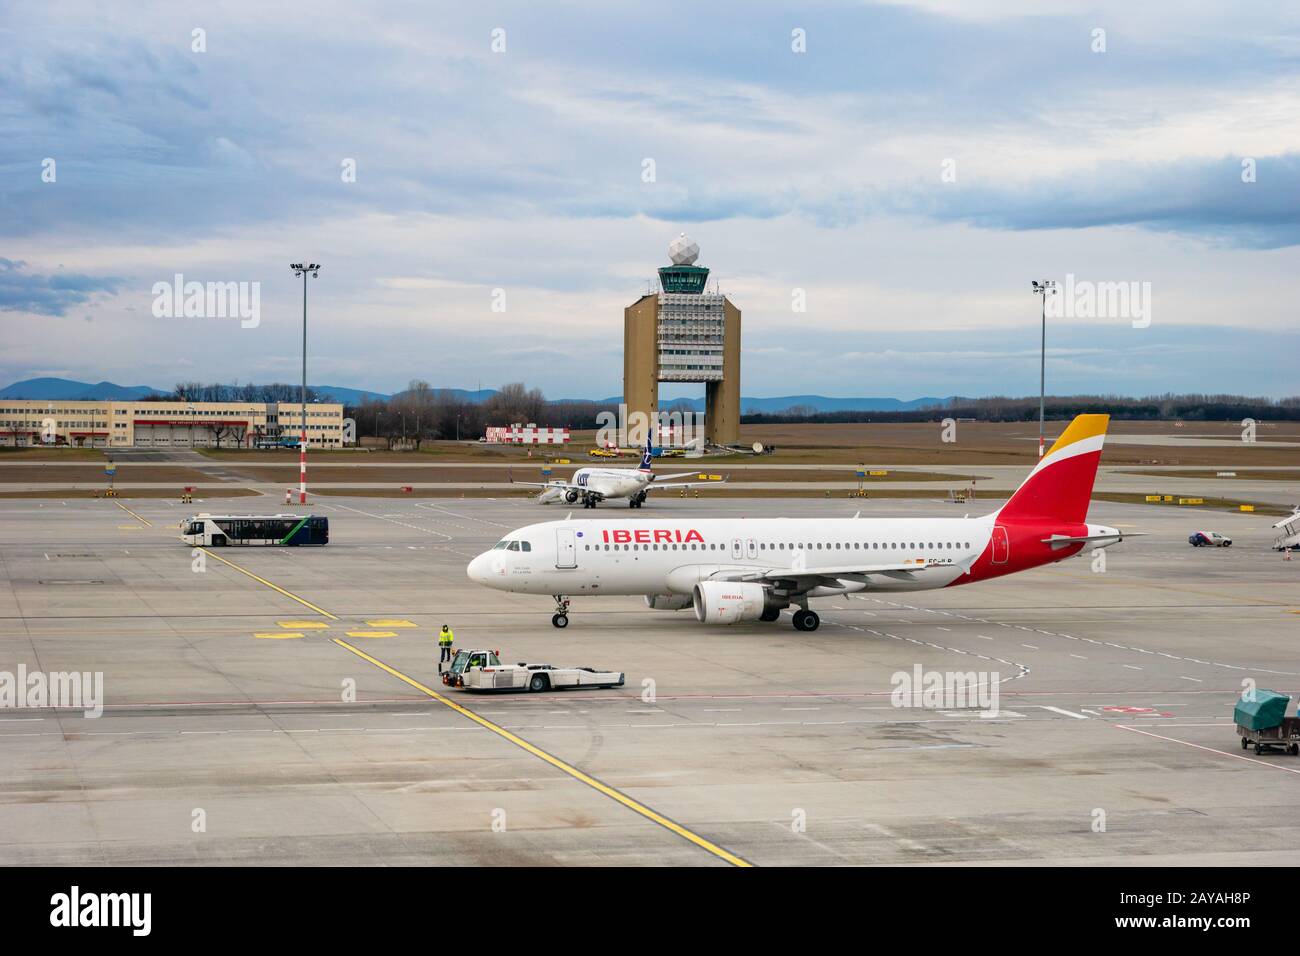 Budapest, Hungary - February 2020: Iberia Airlines aircraft on runway of Budapest Ferenc Liszt International Airport. Stock Photo